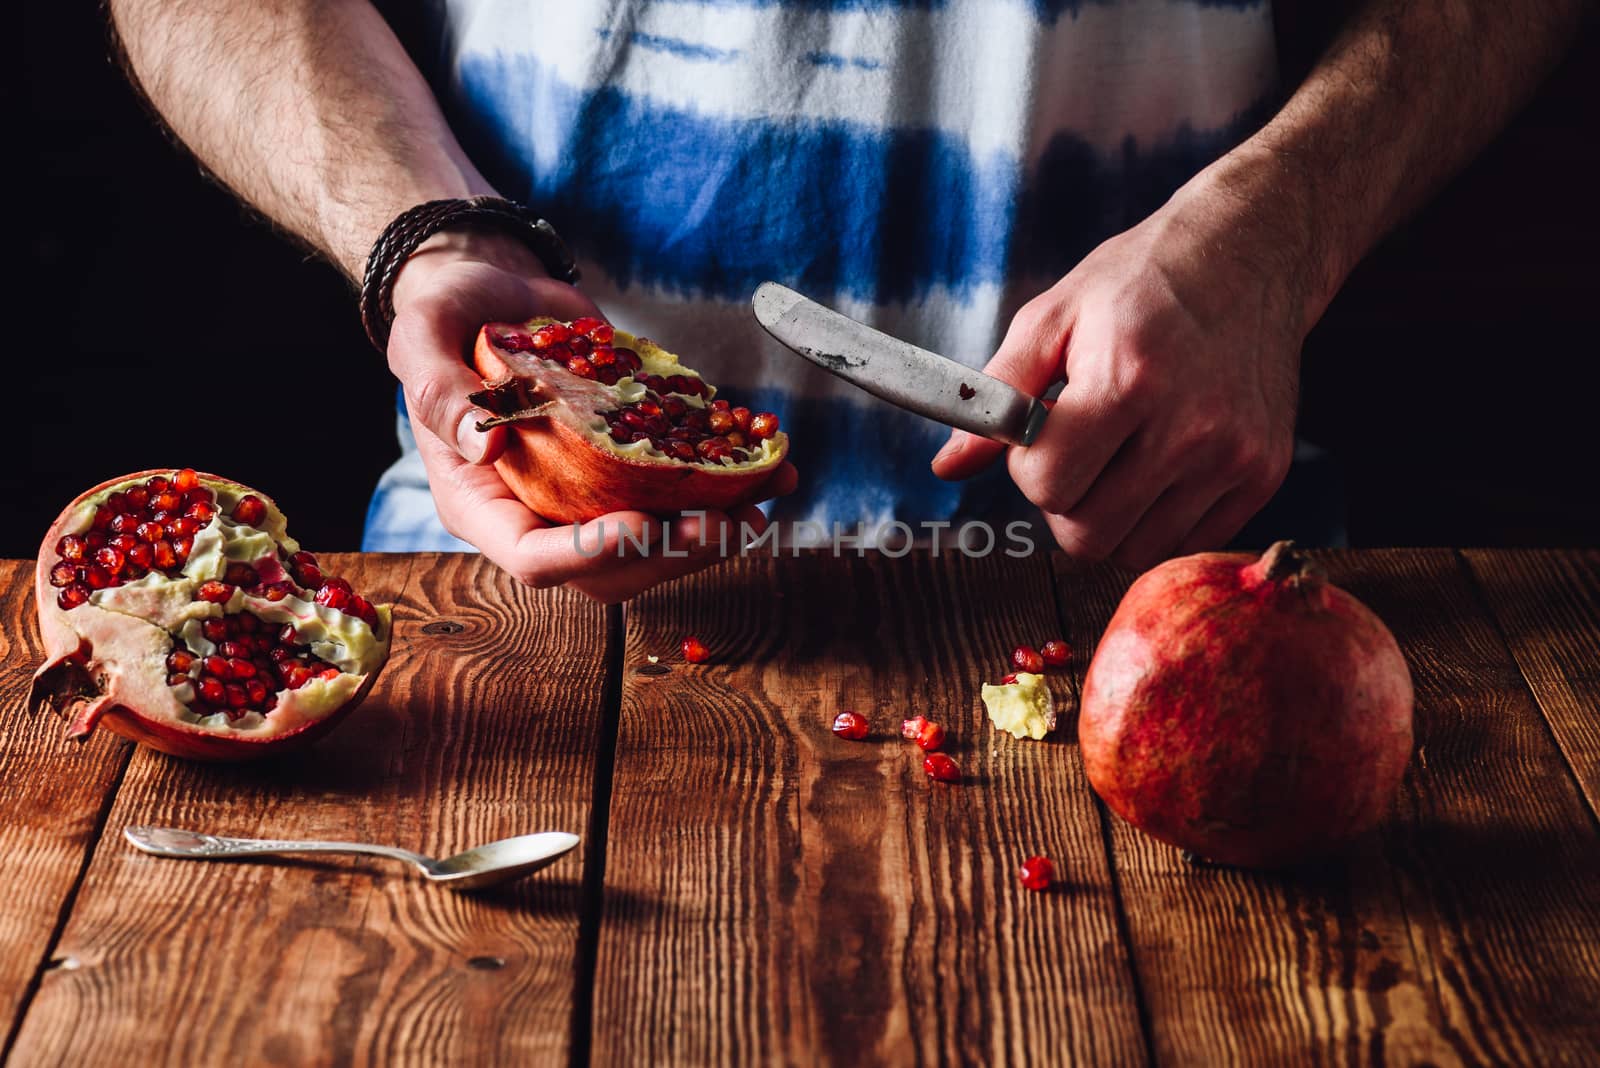 Pomegranate and Knife in Human Hands. by Seva_blsv